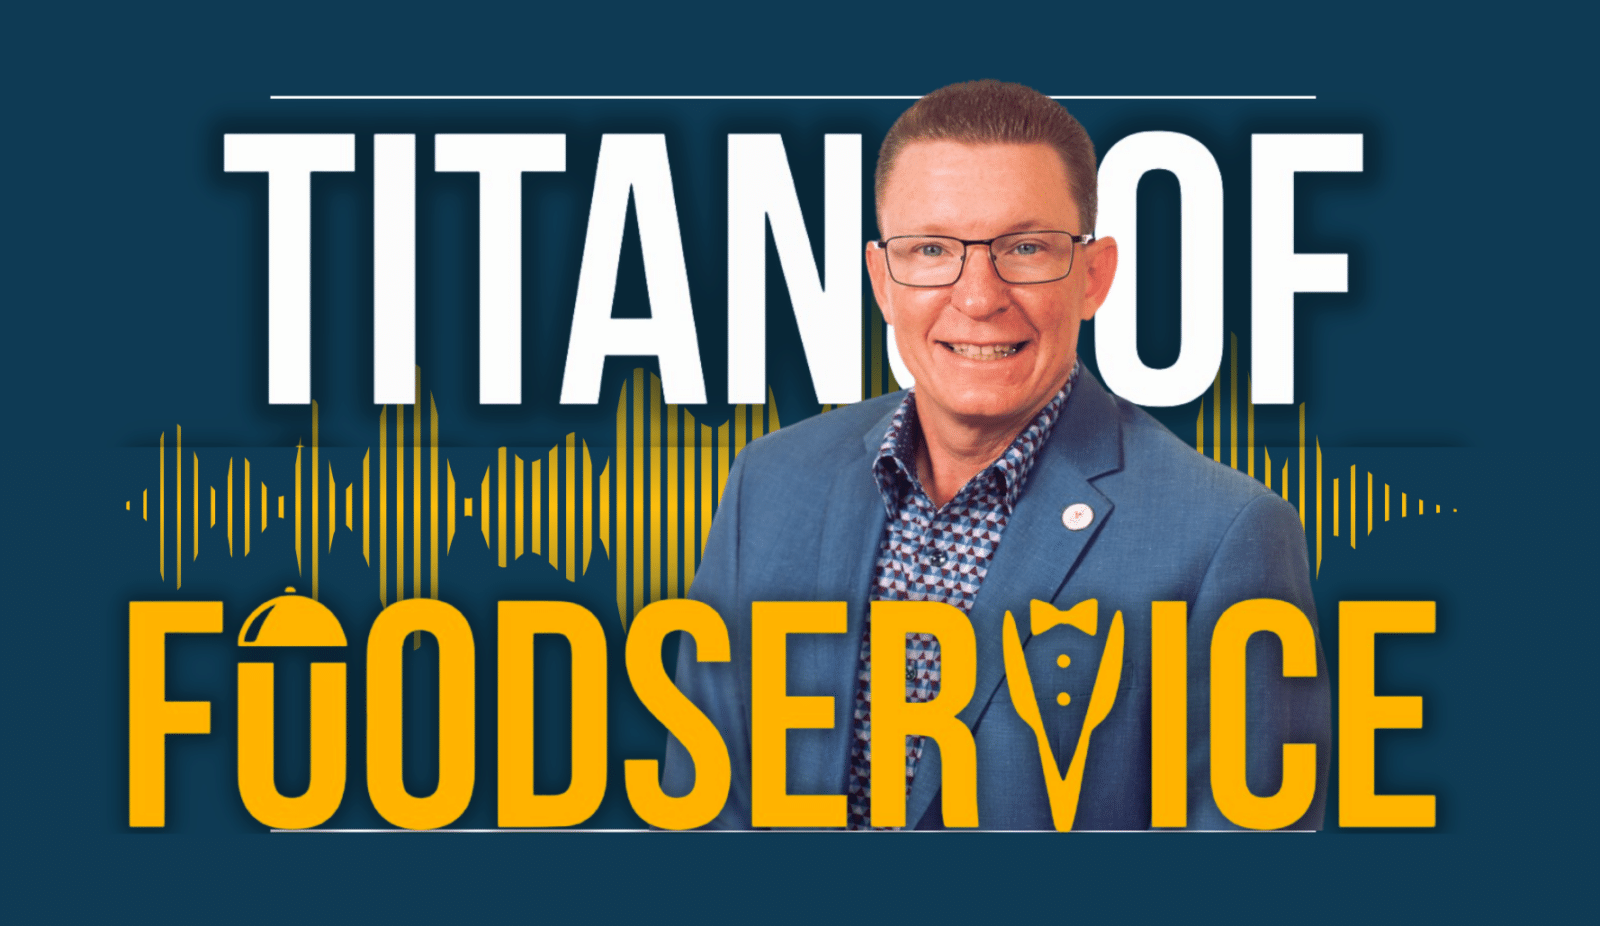 Beyond Distribution: Empowering Communities with Eric Goodman, President/CEO of Mountain View Services